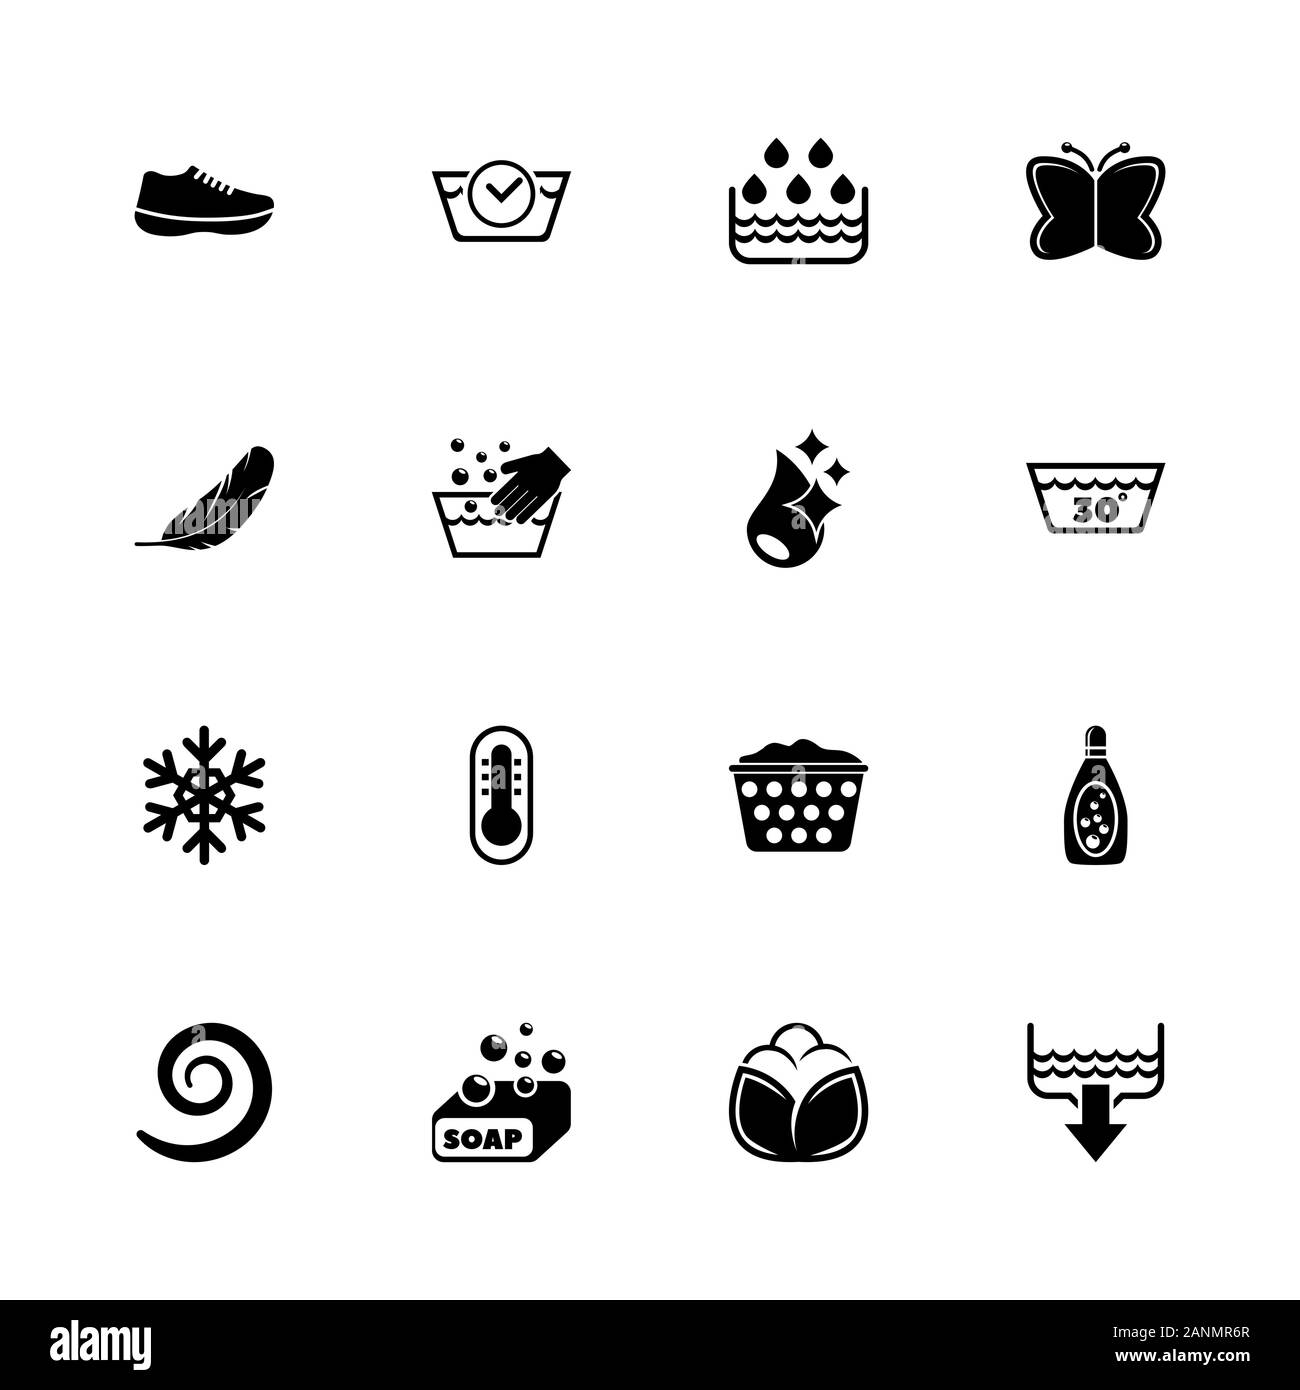 Washing icons - Expand to any size - Change to any colour. Flat Vector Icons - Black Illustration on White Background. Stock Vector